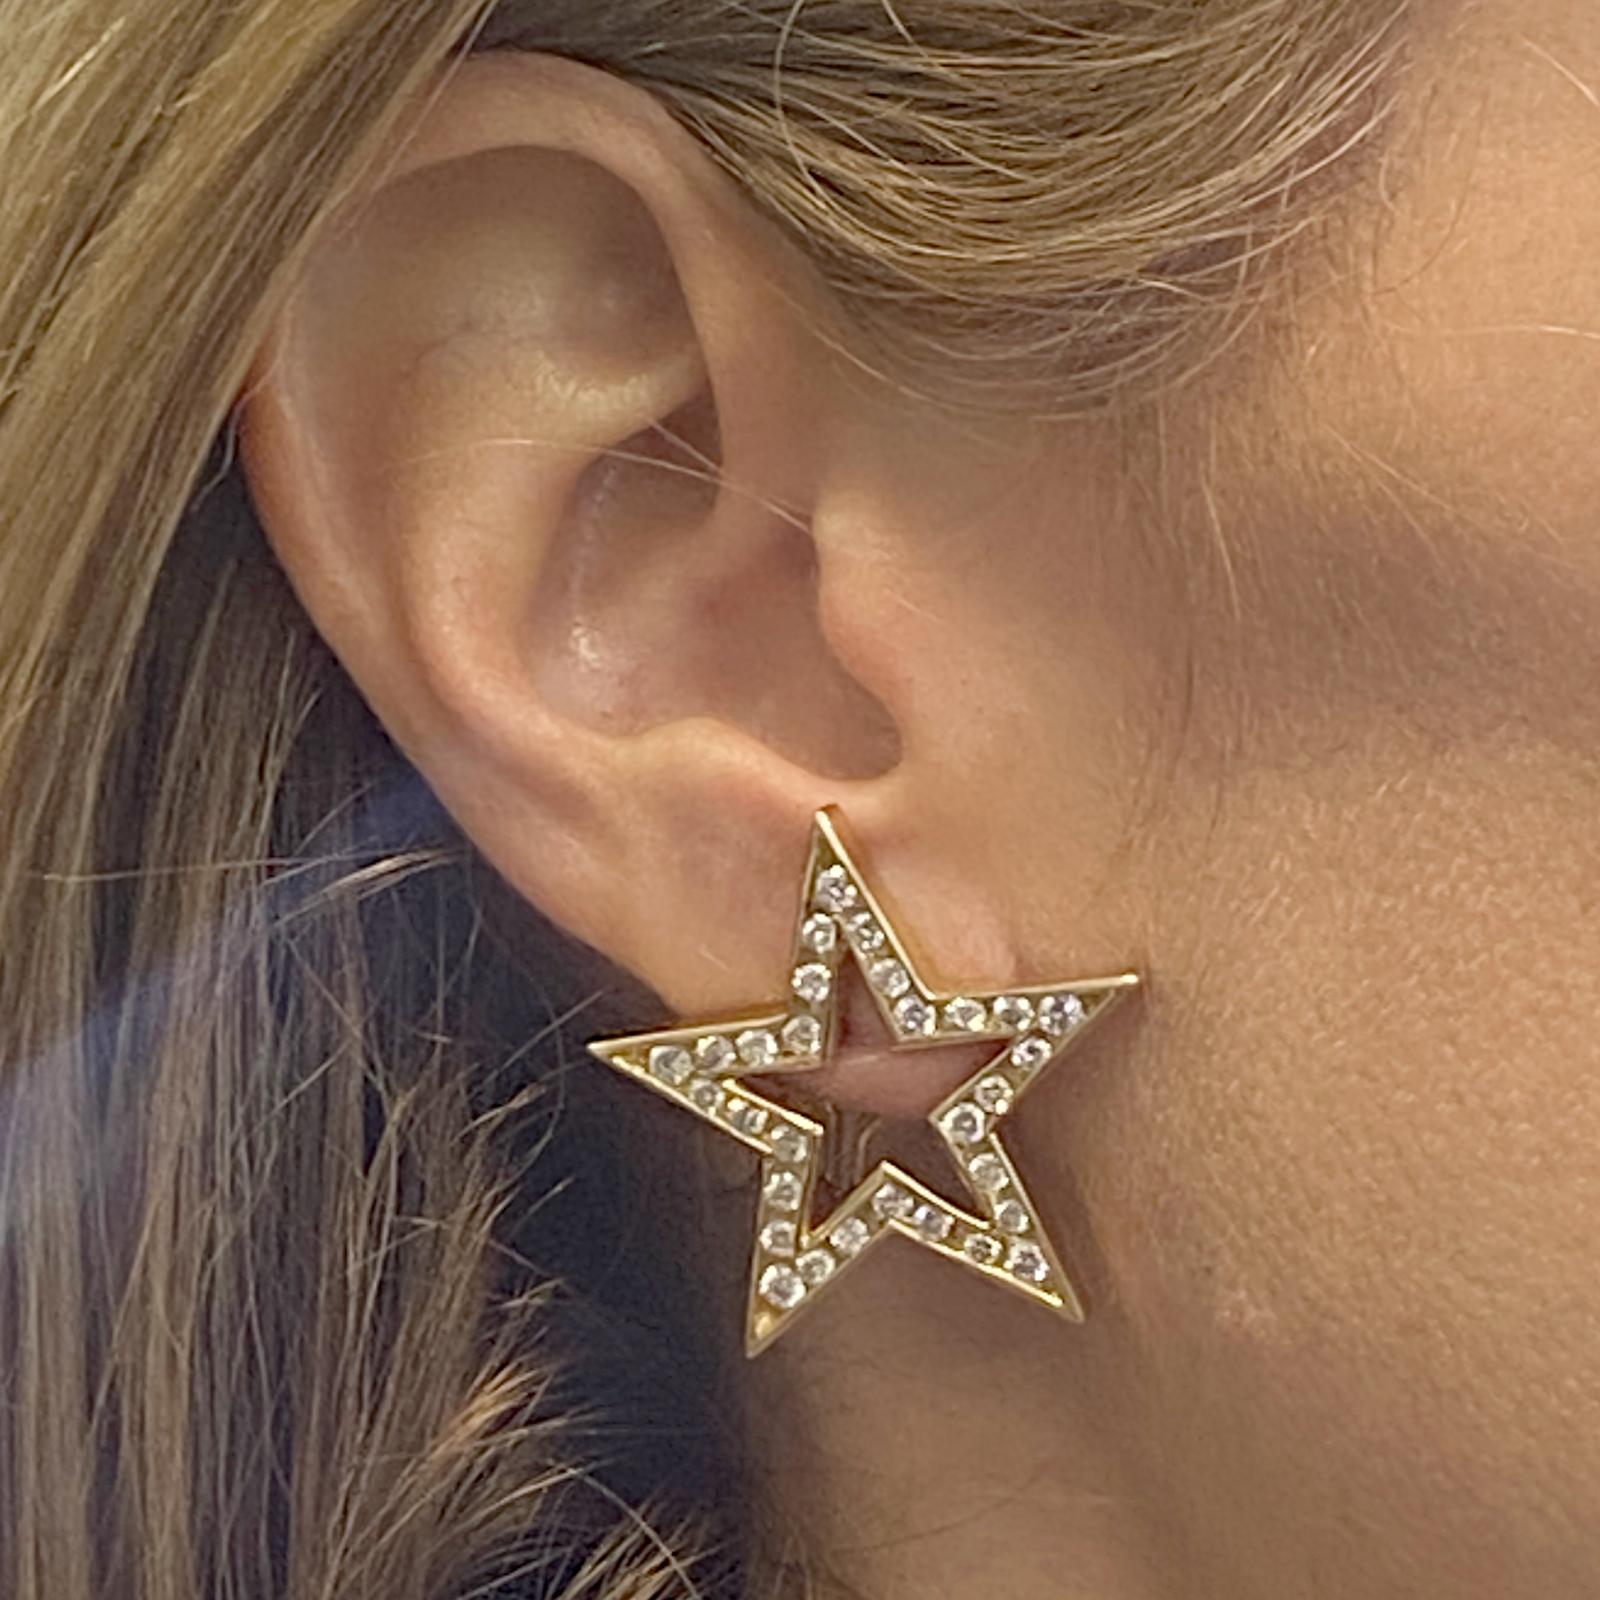 Stylish open star diamond earrings fashioned in 14 karat yellow gold. The earrings feature 56 round brilliant cut diamonds weighing approximately 2.50 carat total weight and graded G color and VS2-SI1 clarity. The stars measure 1.25 x 1.25 inches